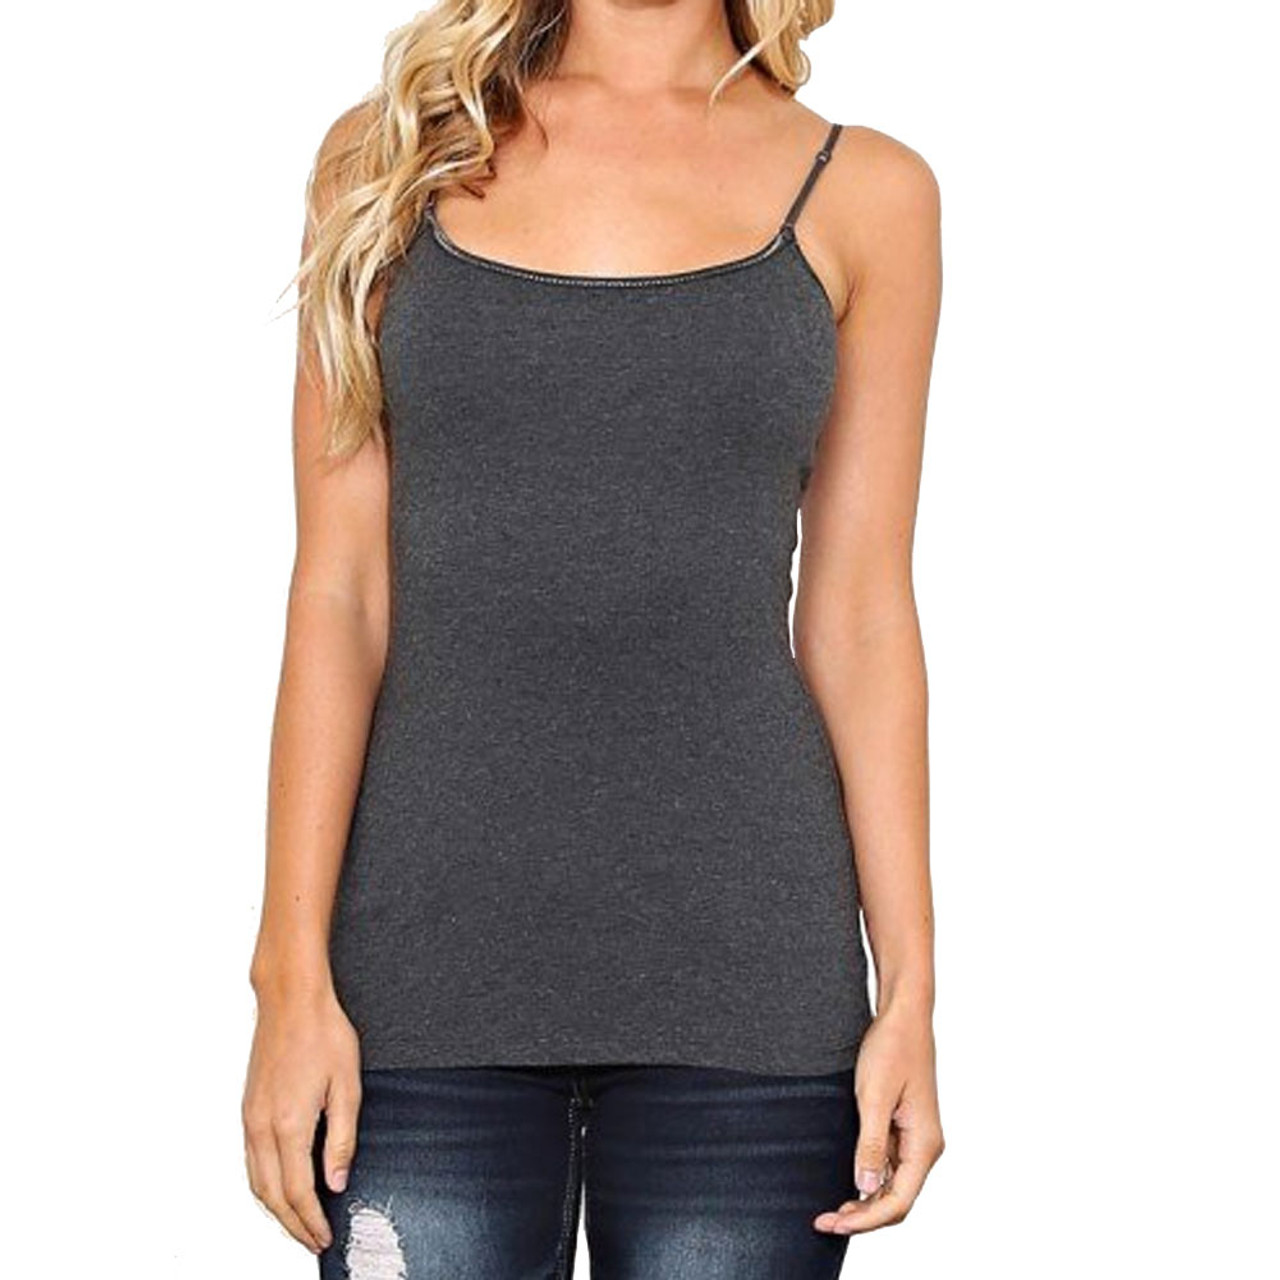 Womens Grey Camisoles Sleeveless Tops & Tees - Tops, Clothing